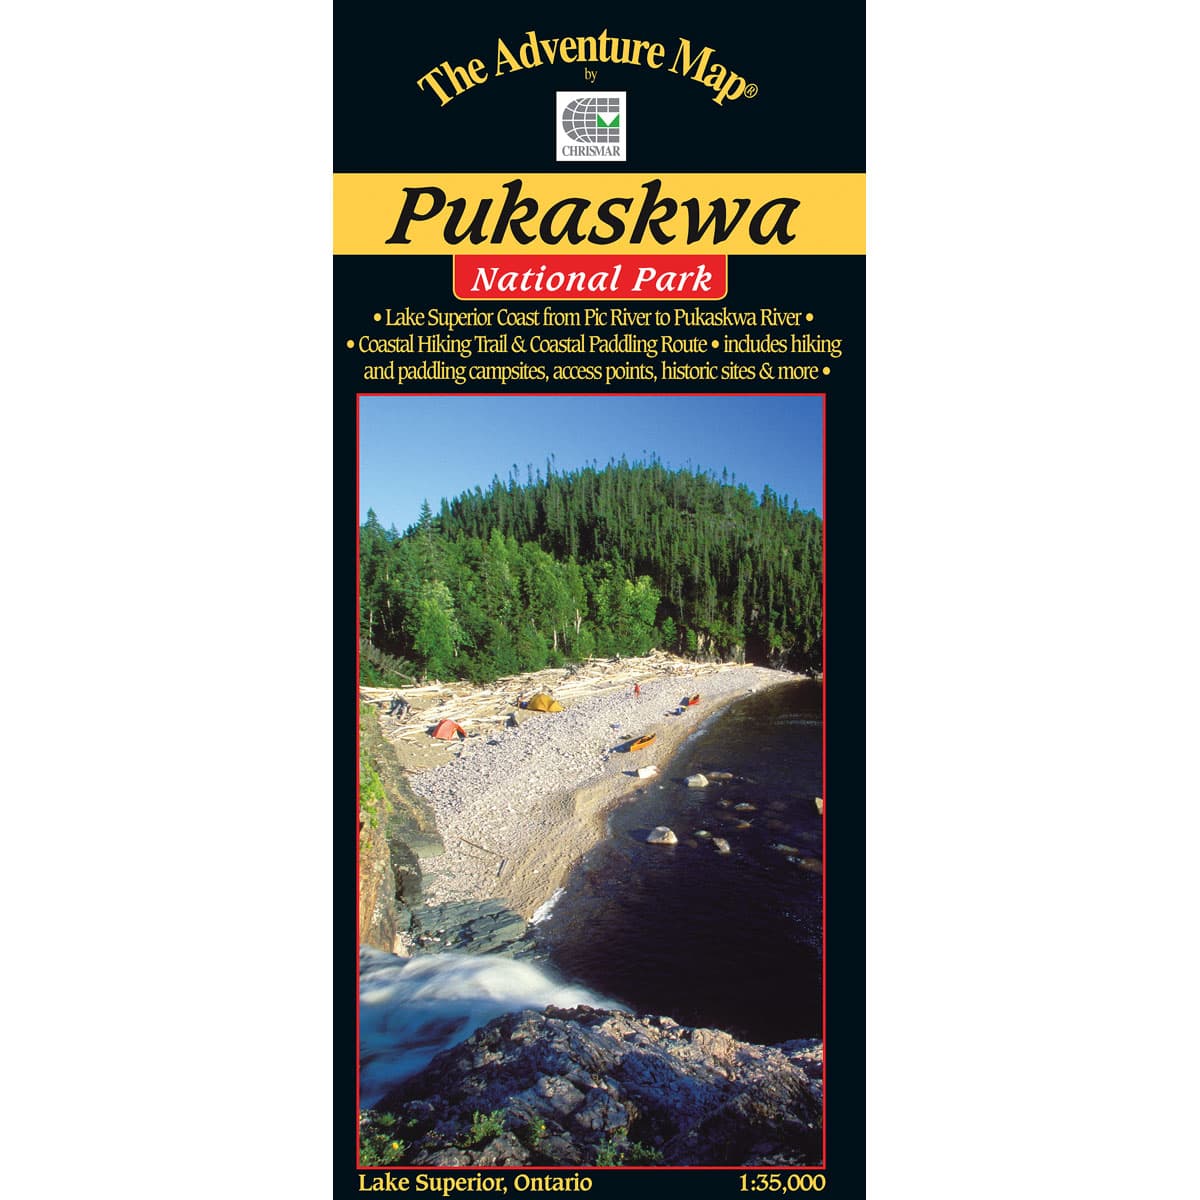 The Adventure Map Pukaskwa National Park